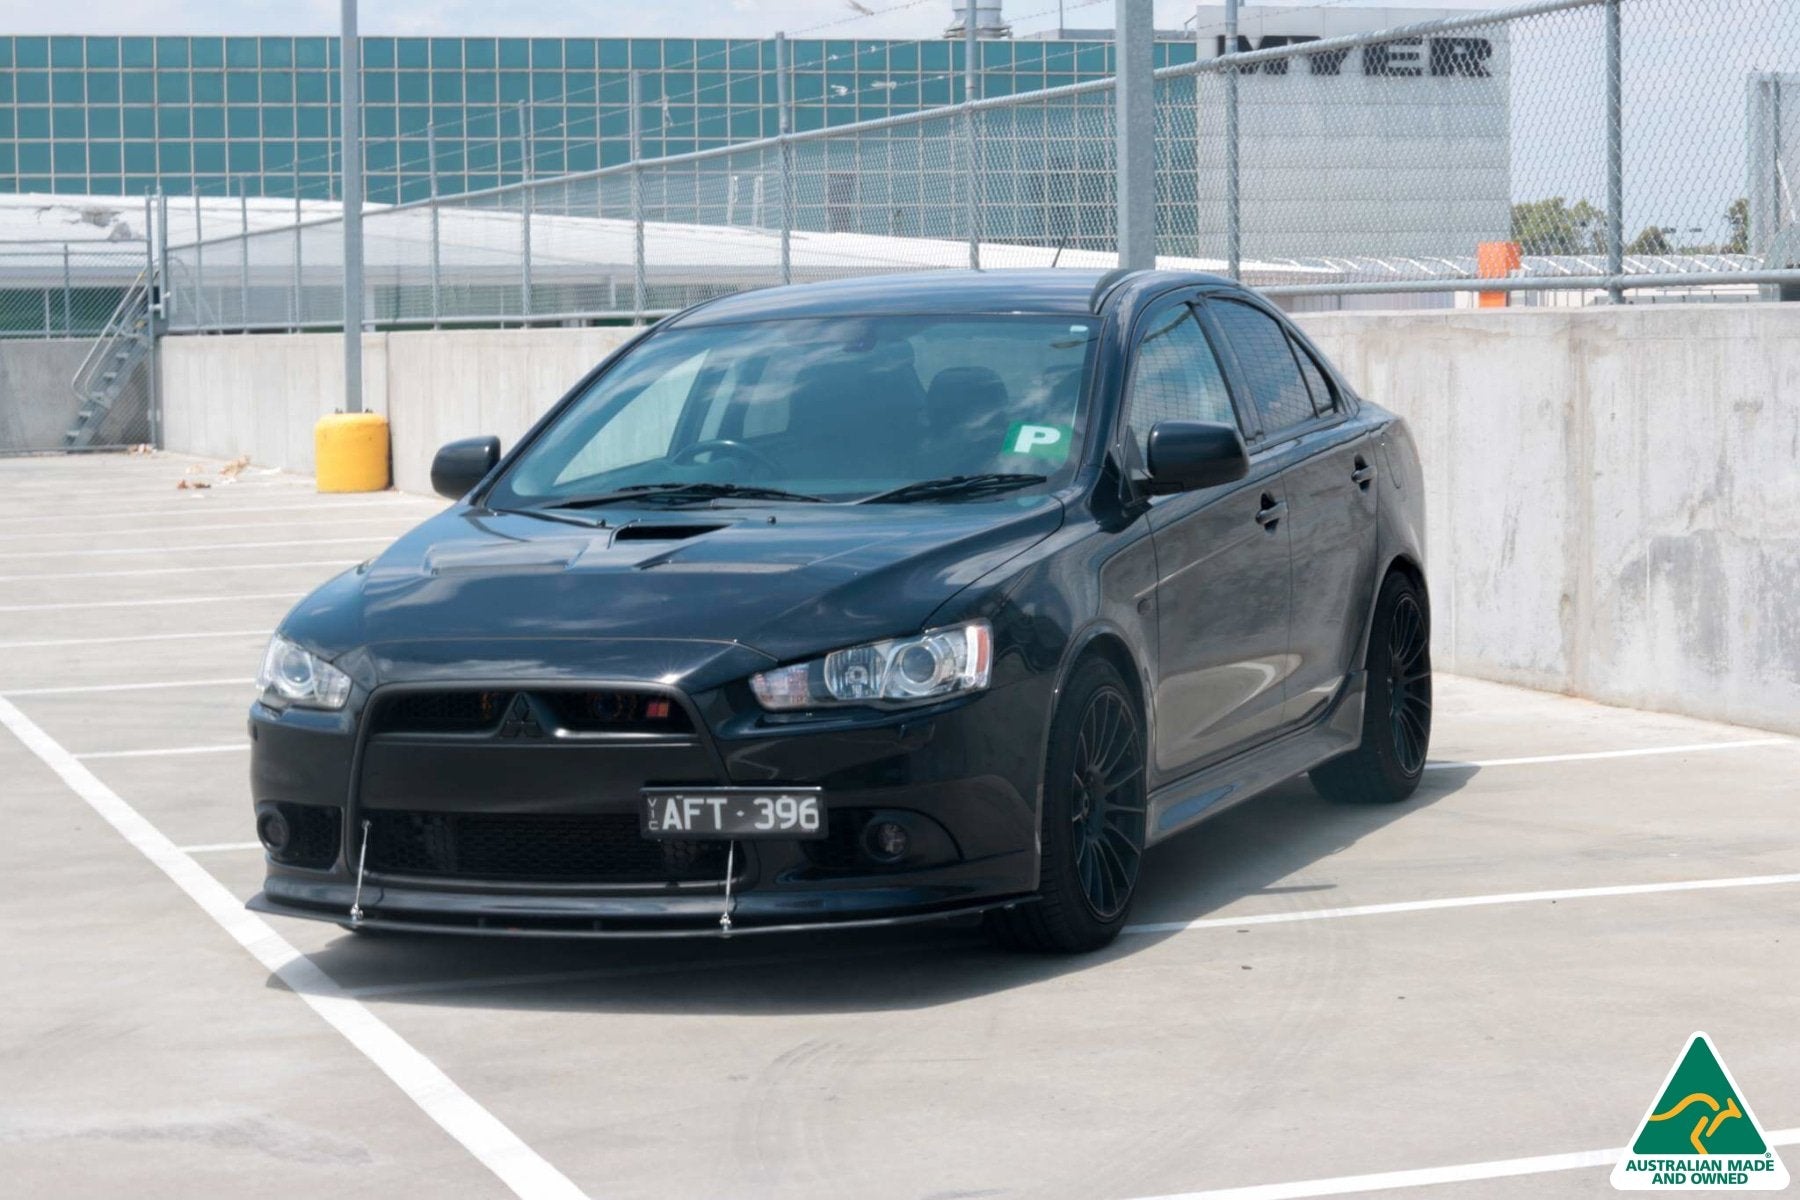 Lancer Ralliart CJ Front Splitter V2.5 With Support Rods - MODE Auto Concepts